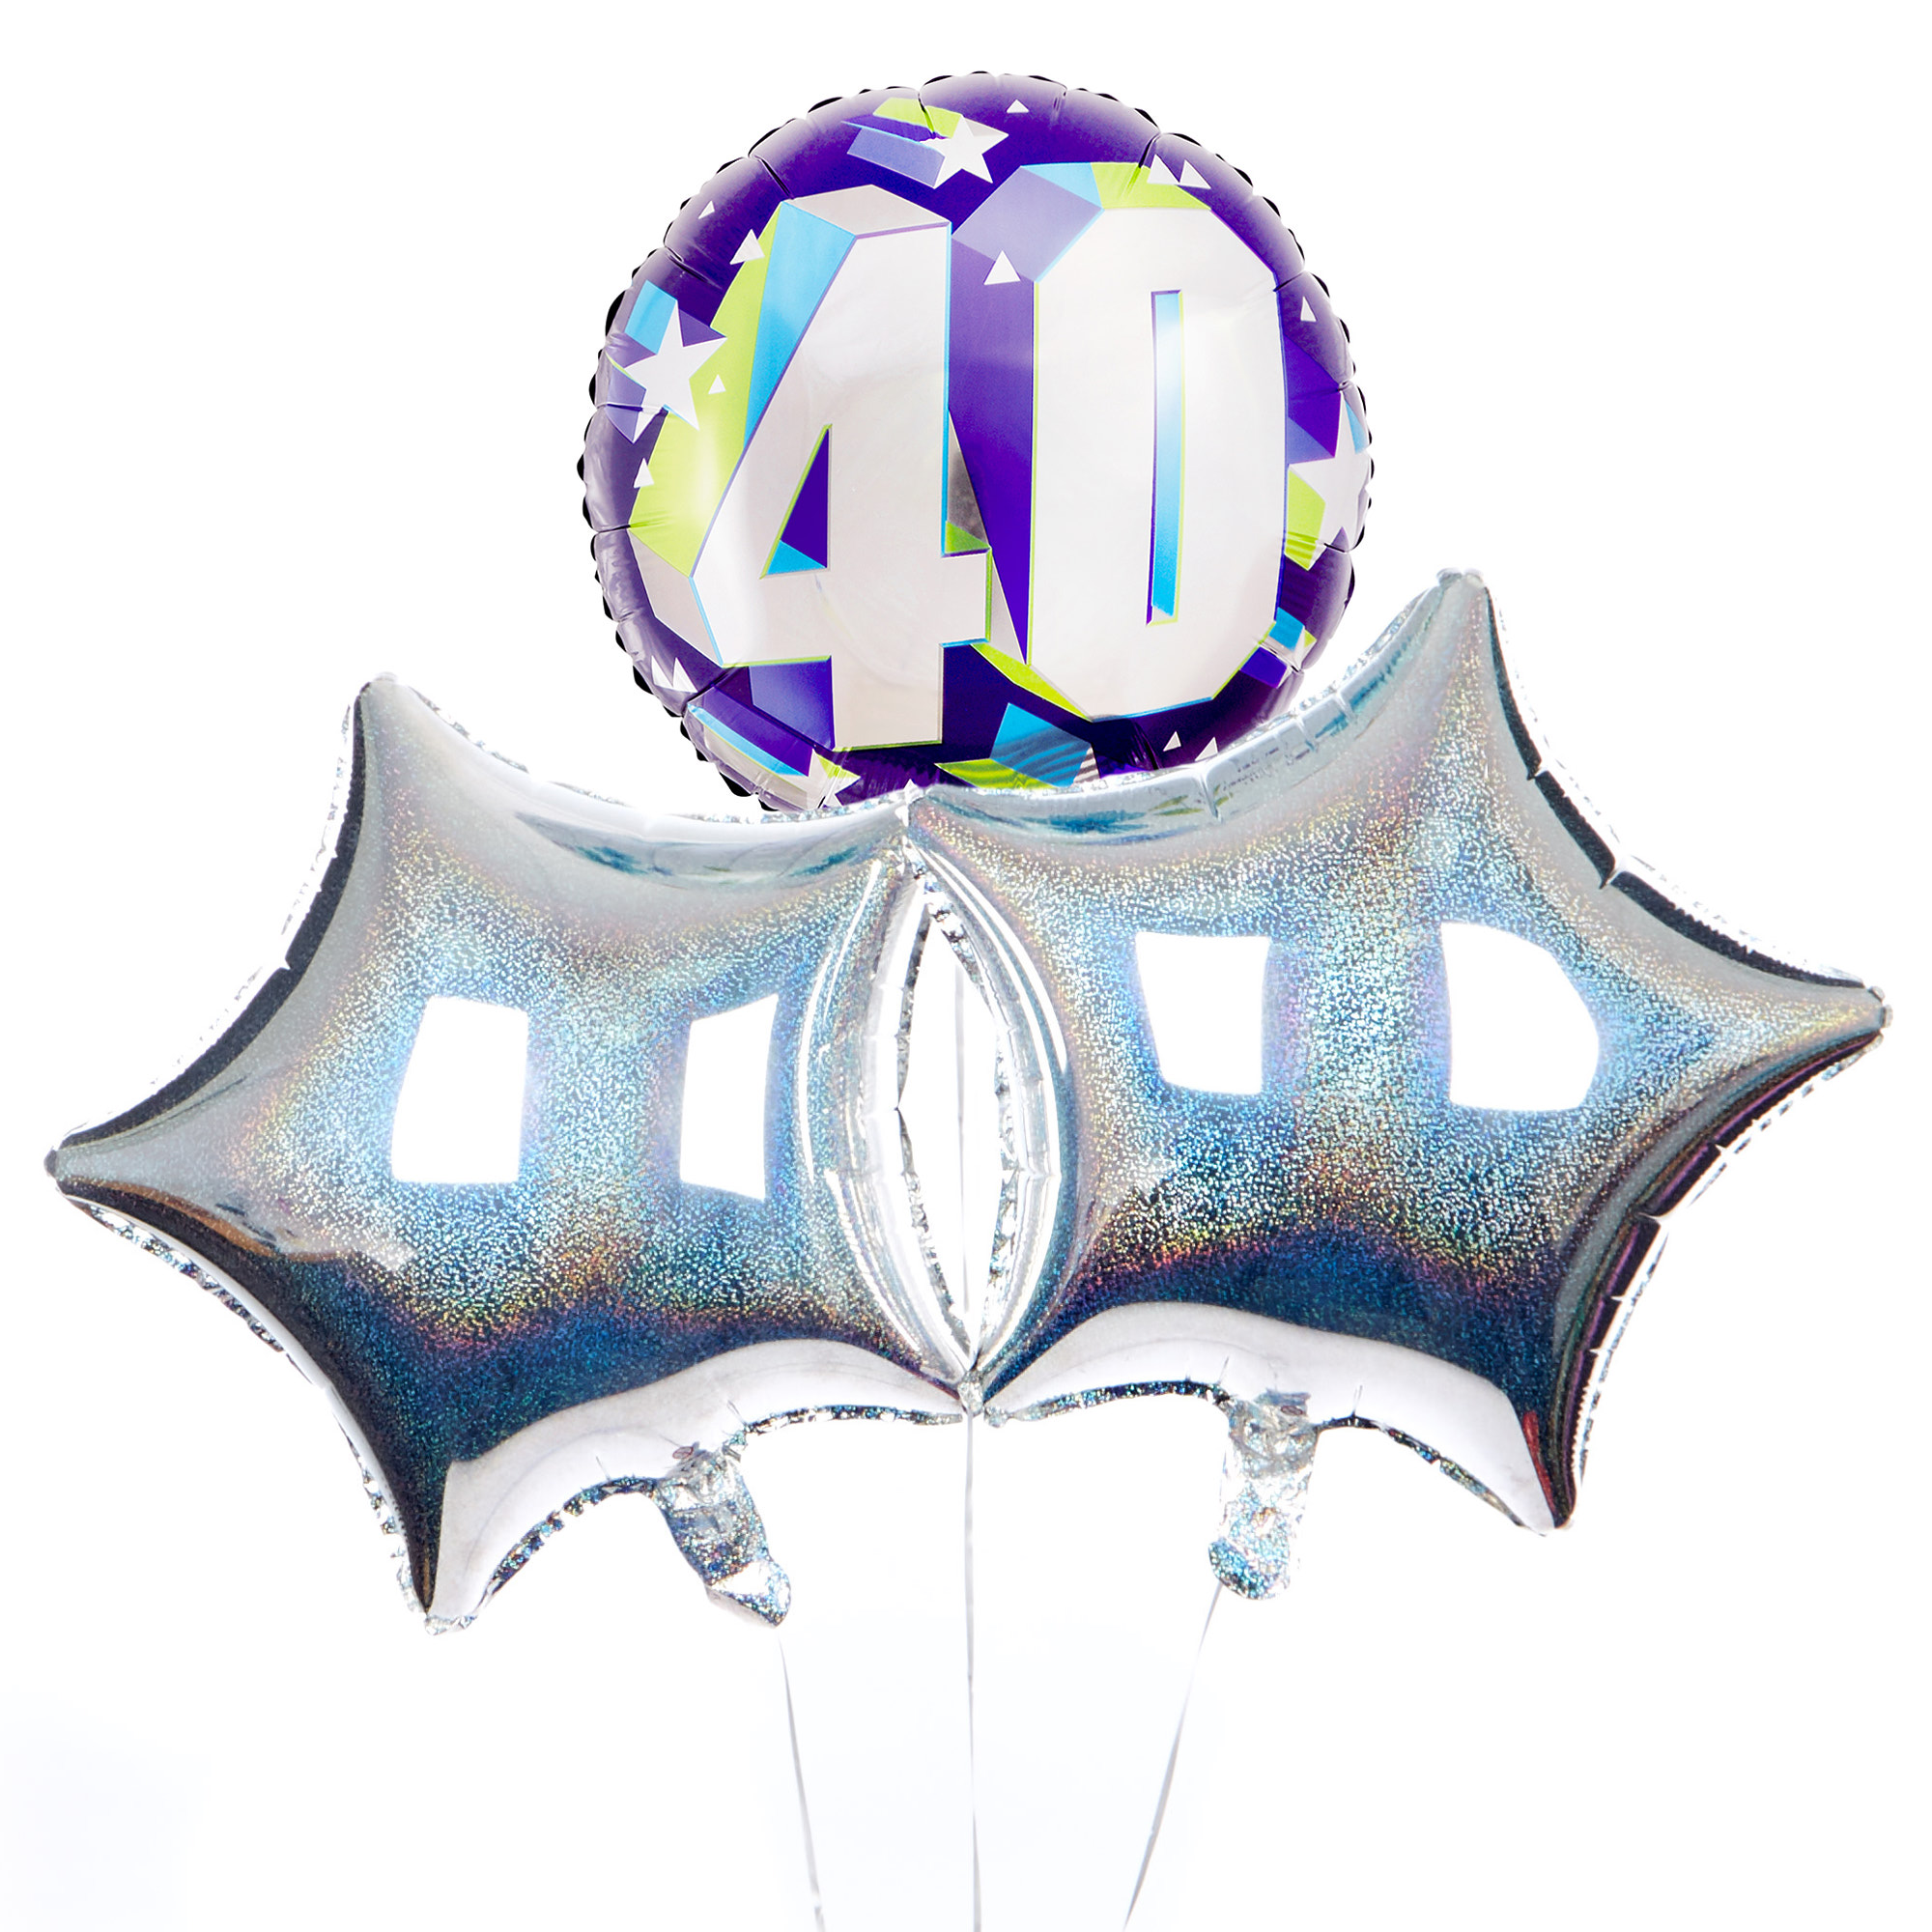 Bold 40th Birthday Balloon Bouquet - DELIVERED INFLATED!